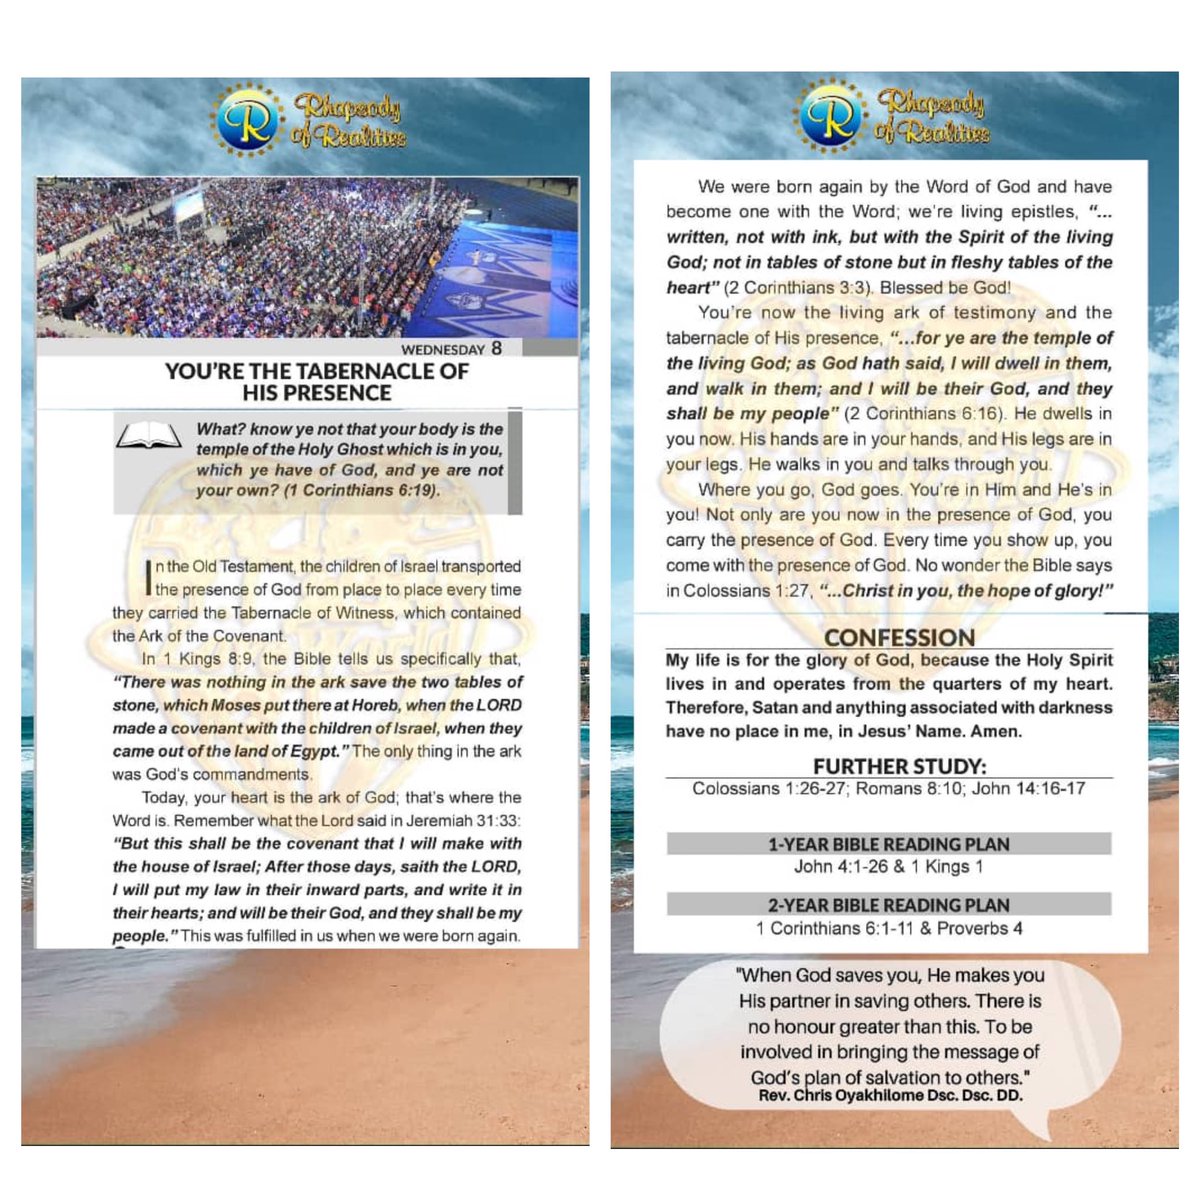 My life is for the glory of God, because the Holy Spirit lives in and operates from the quarters of my heart. Therefore, Satan and anything associated with darkness have no place in me, in Jesus’ Name. Amen.
#RhapsodyMay8 
#RhapsodyOfRealities 
#PastorChris 
#Rhapathon